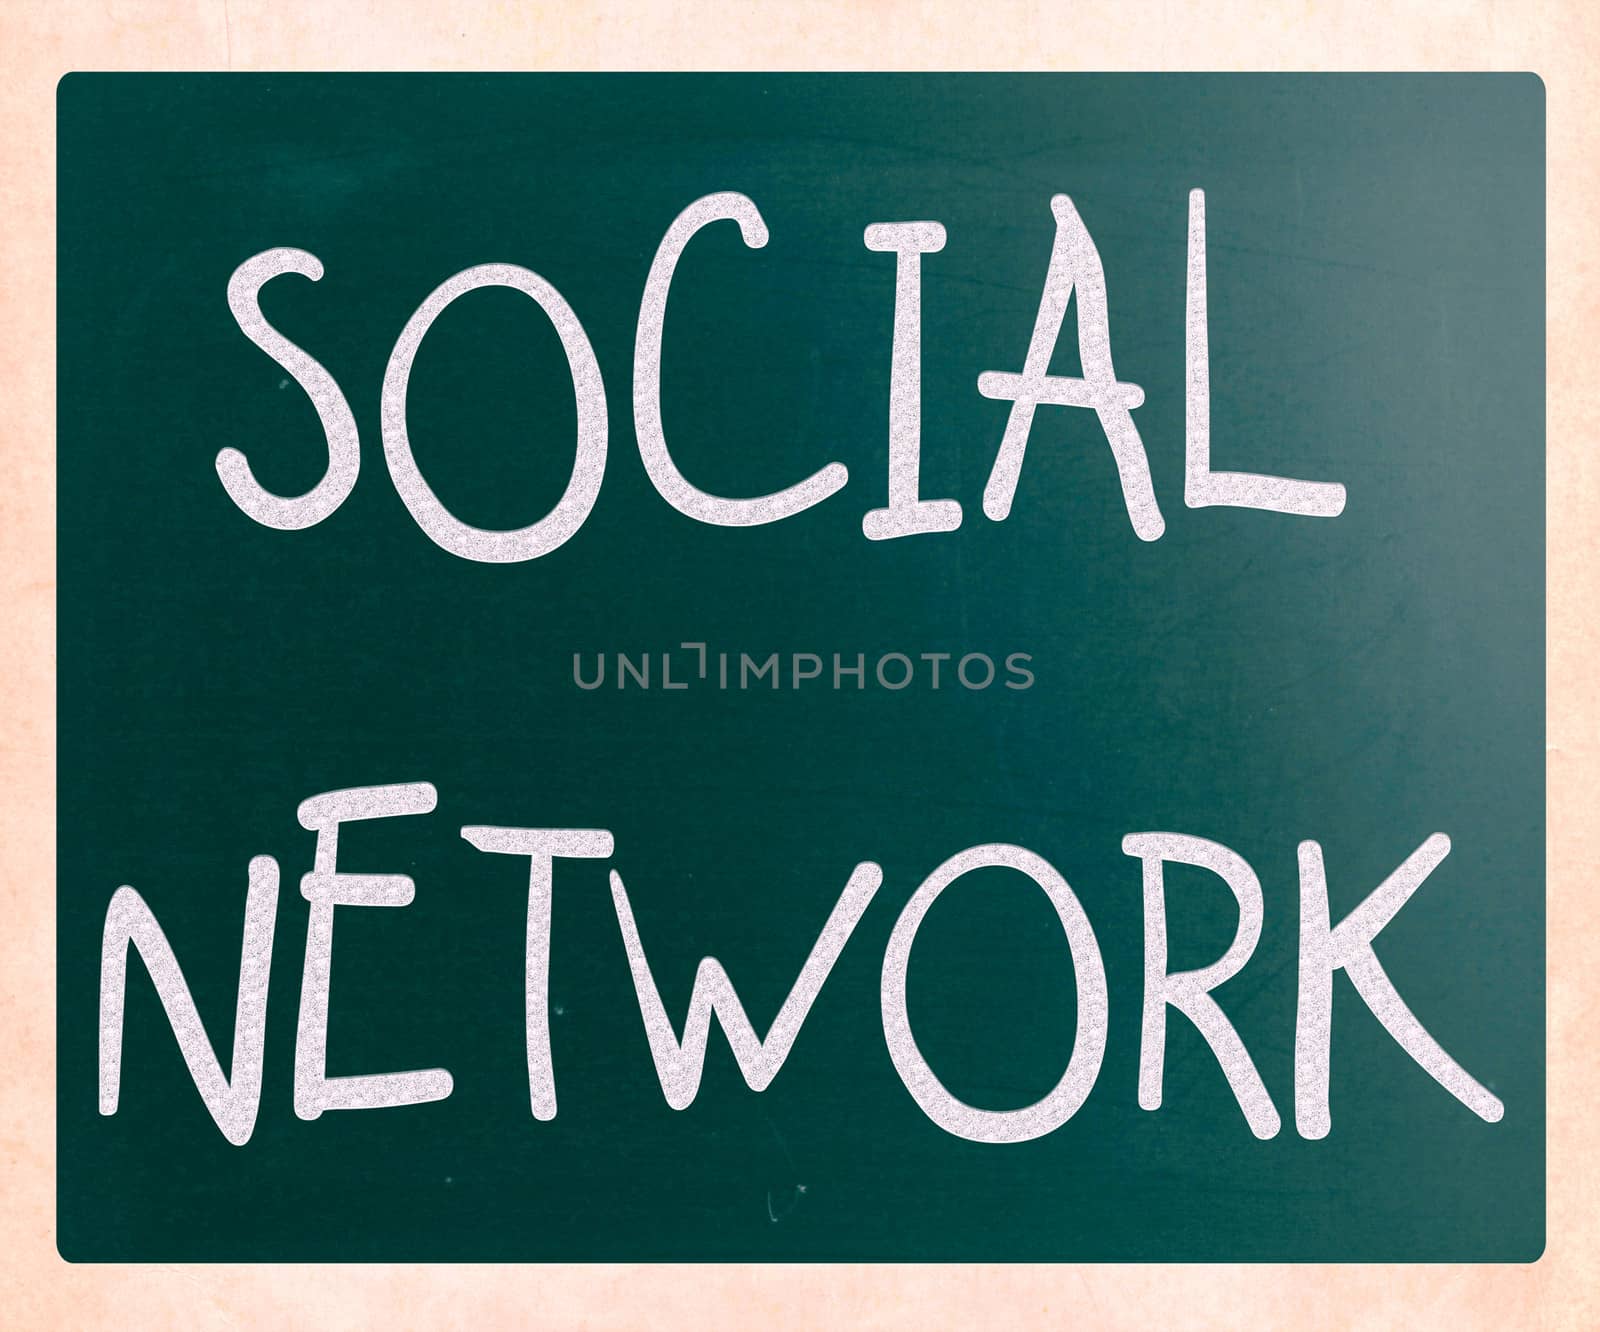 The word "Social network" handwritten with white chalk on a blackboard